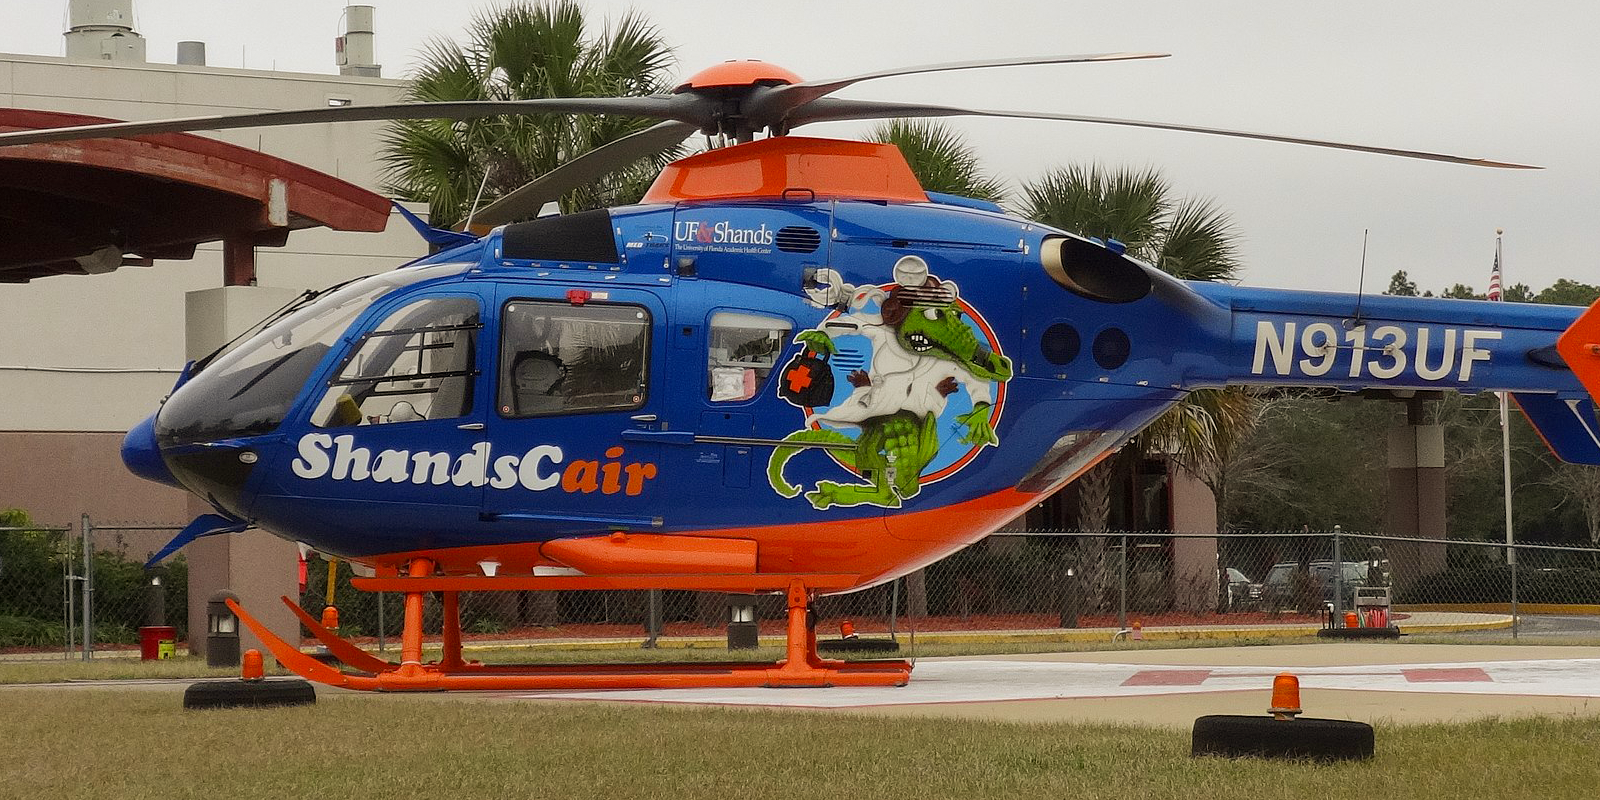 Stock image of ShandsCair paramedic helicopter. Photo credit: Michael Rivera/Wikimedia.